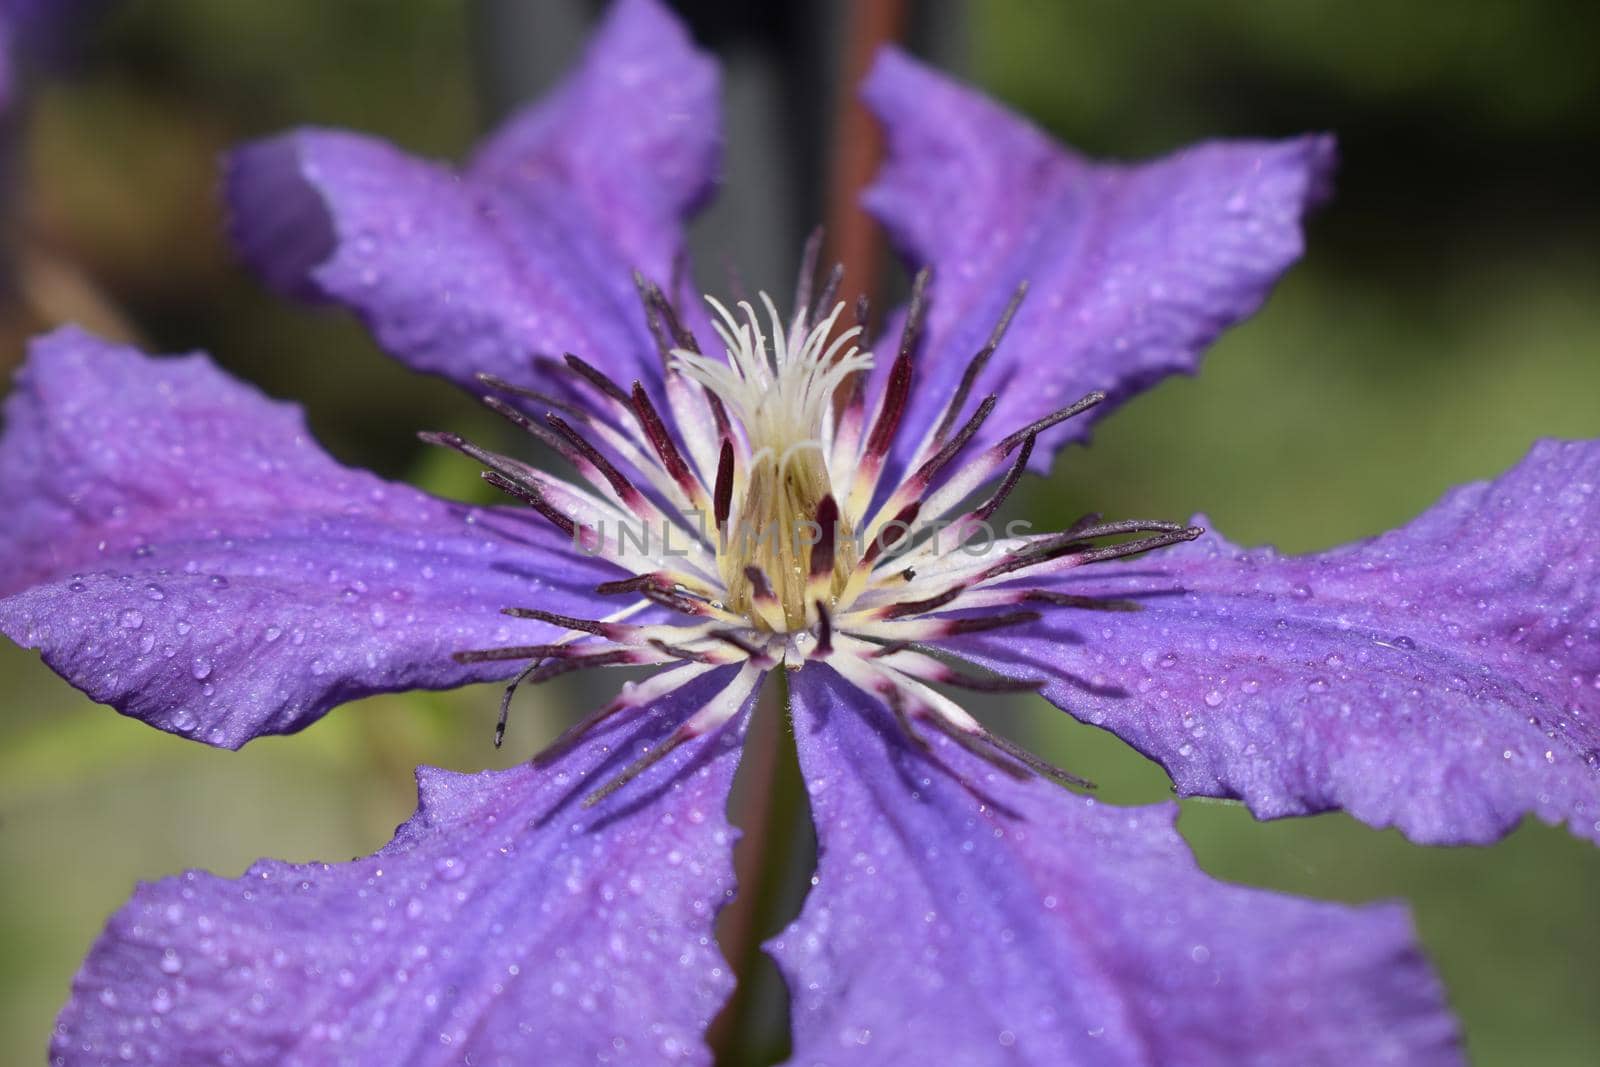 A purple clematis flower, clematis viticella, blooms in a Japanese garden. Flower of clematis - Ranunculaceae. Large-Flowered Clematis